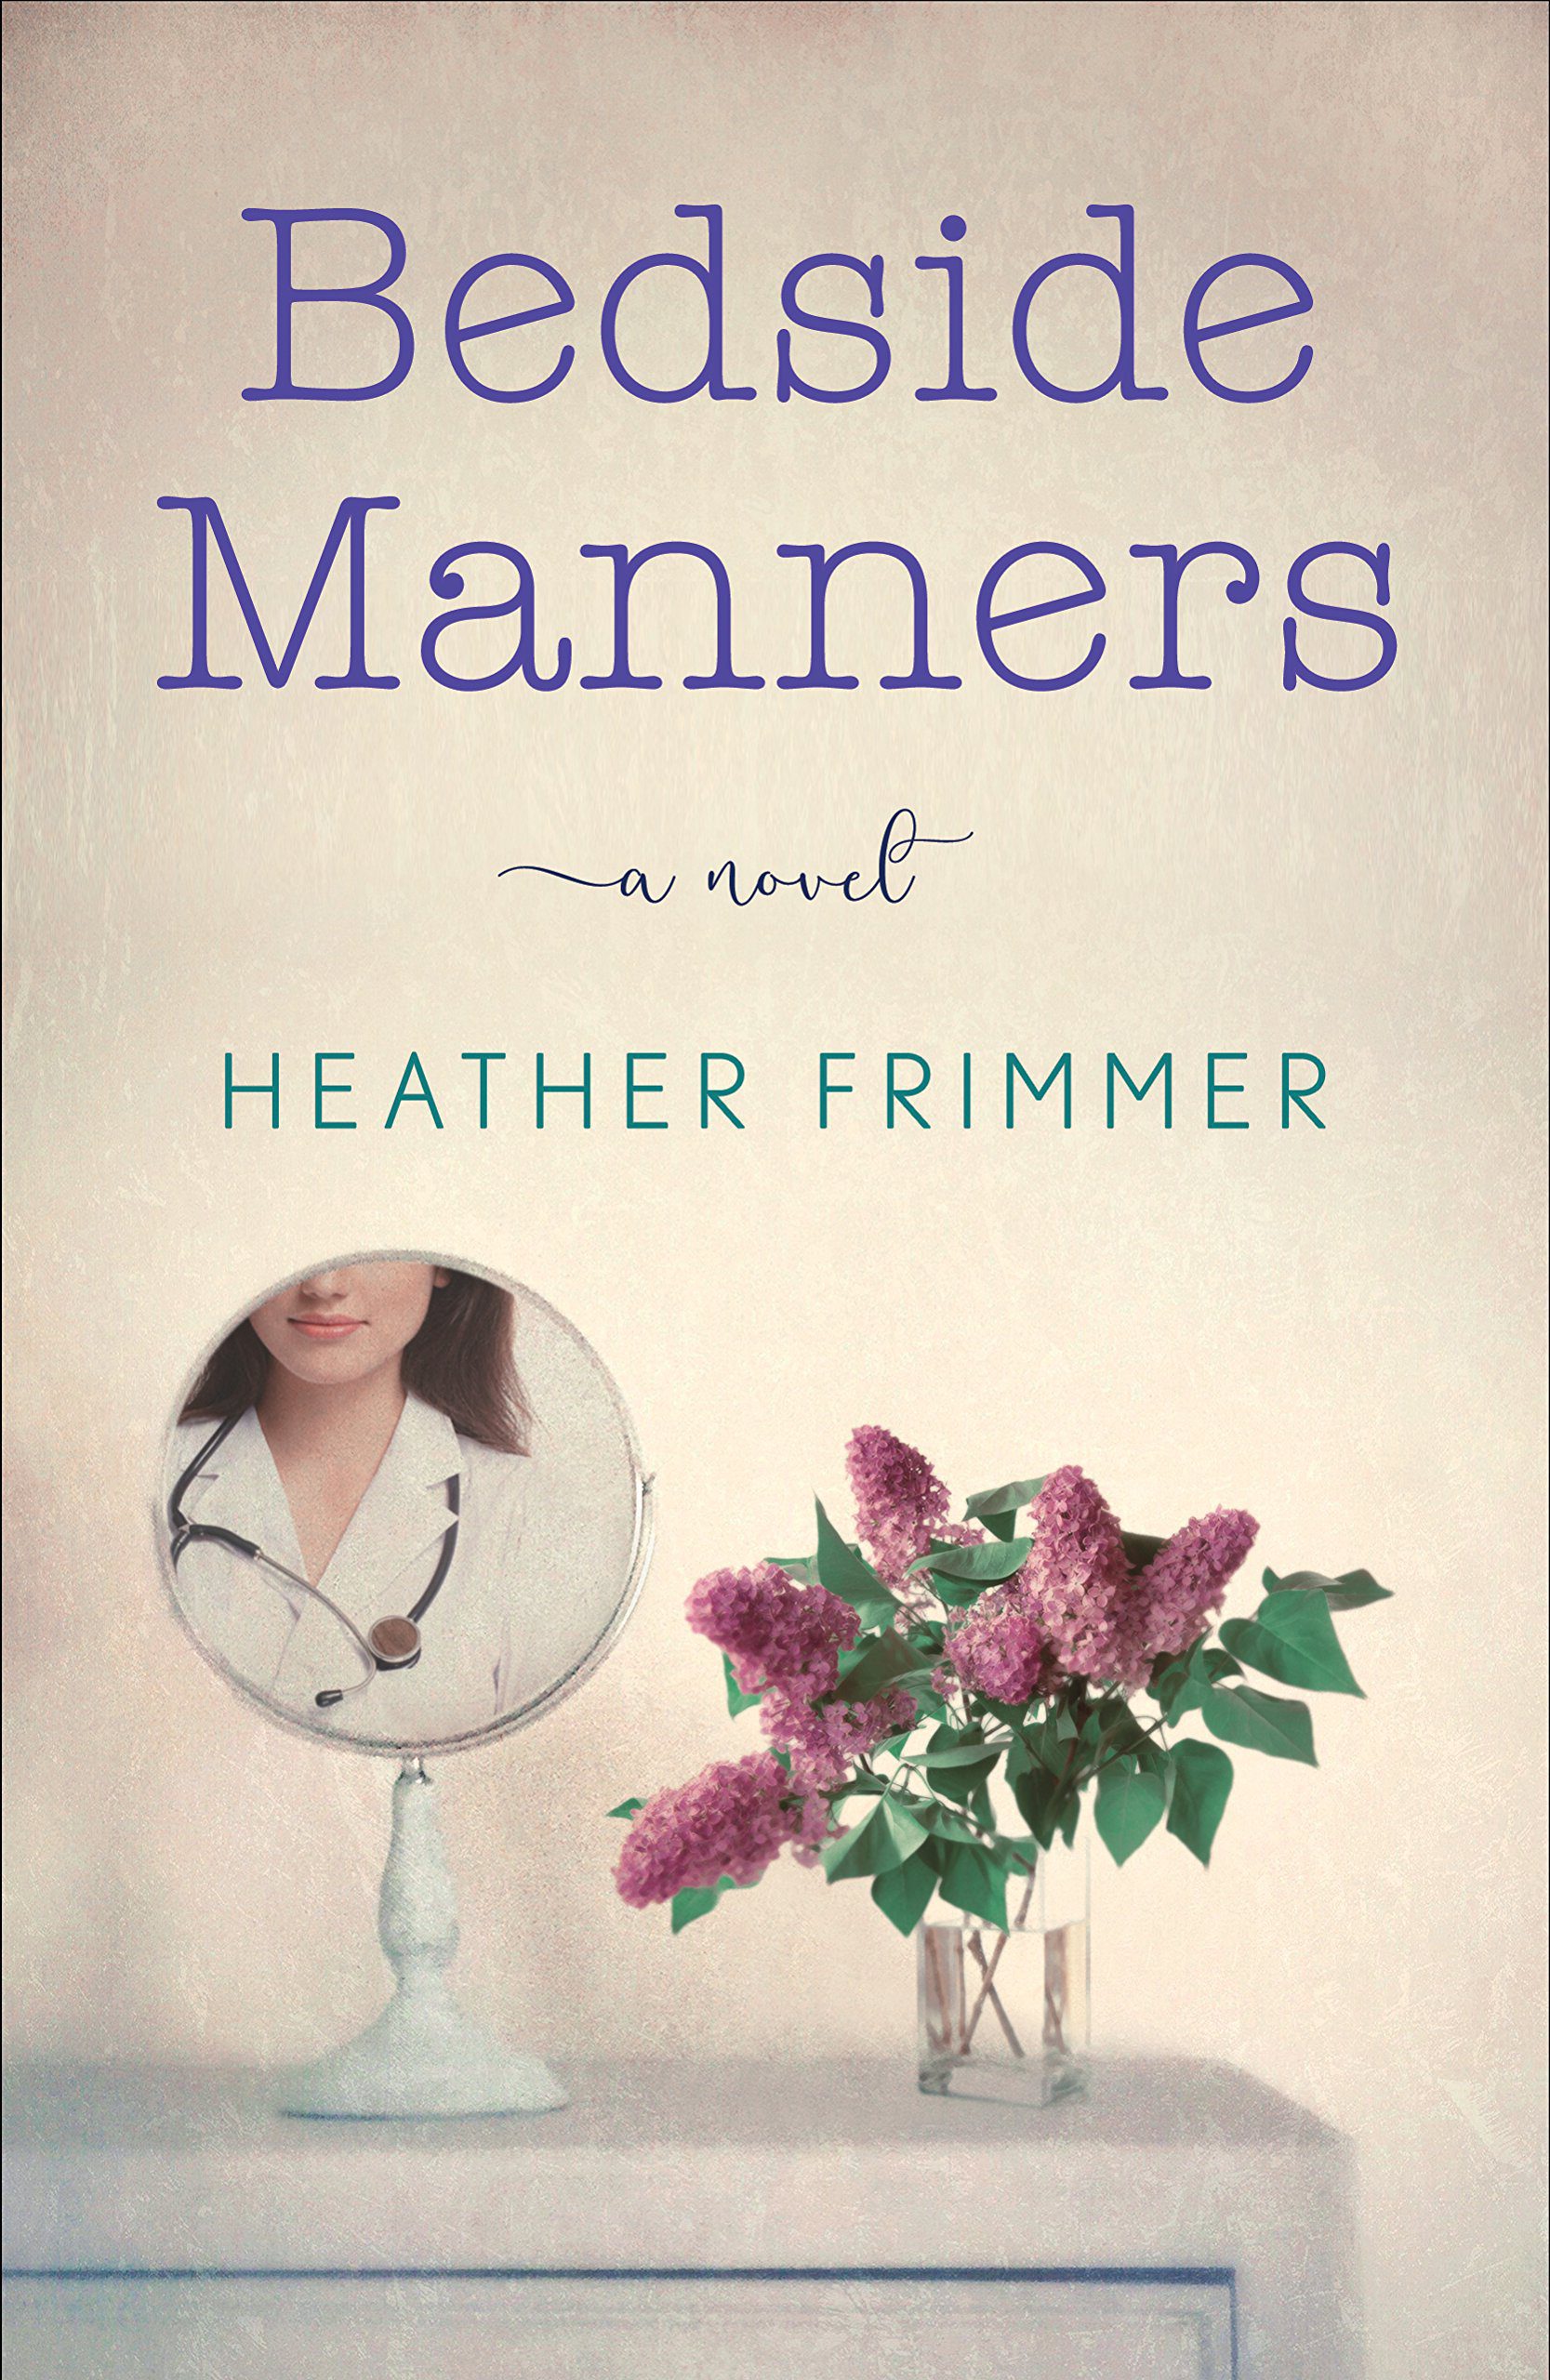 Bedside Manners by Heather Frimmer | leahdecesare.com